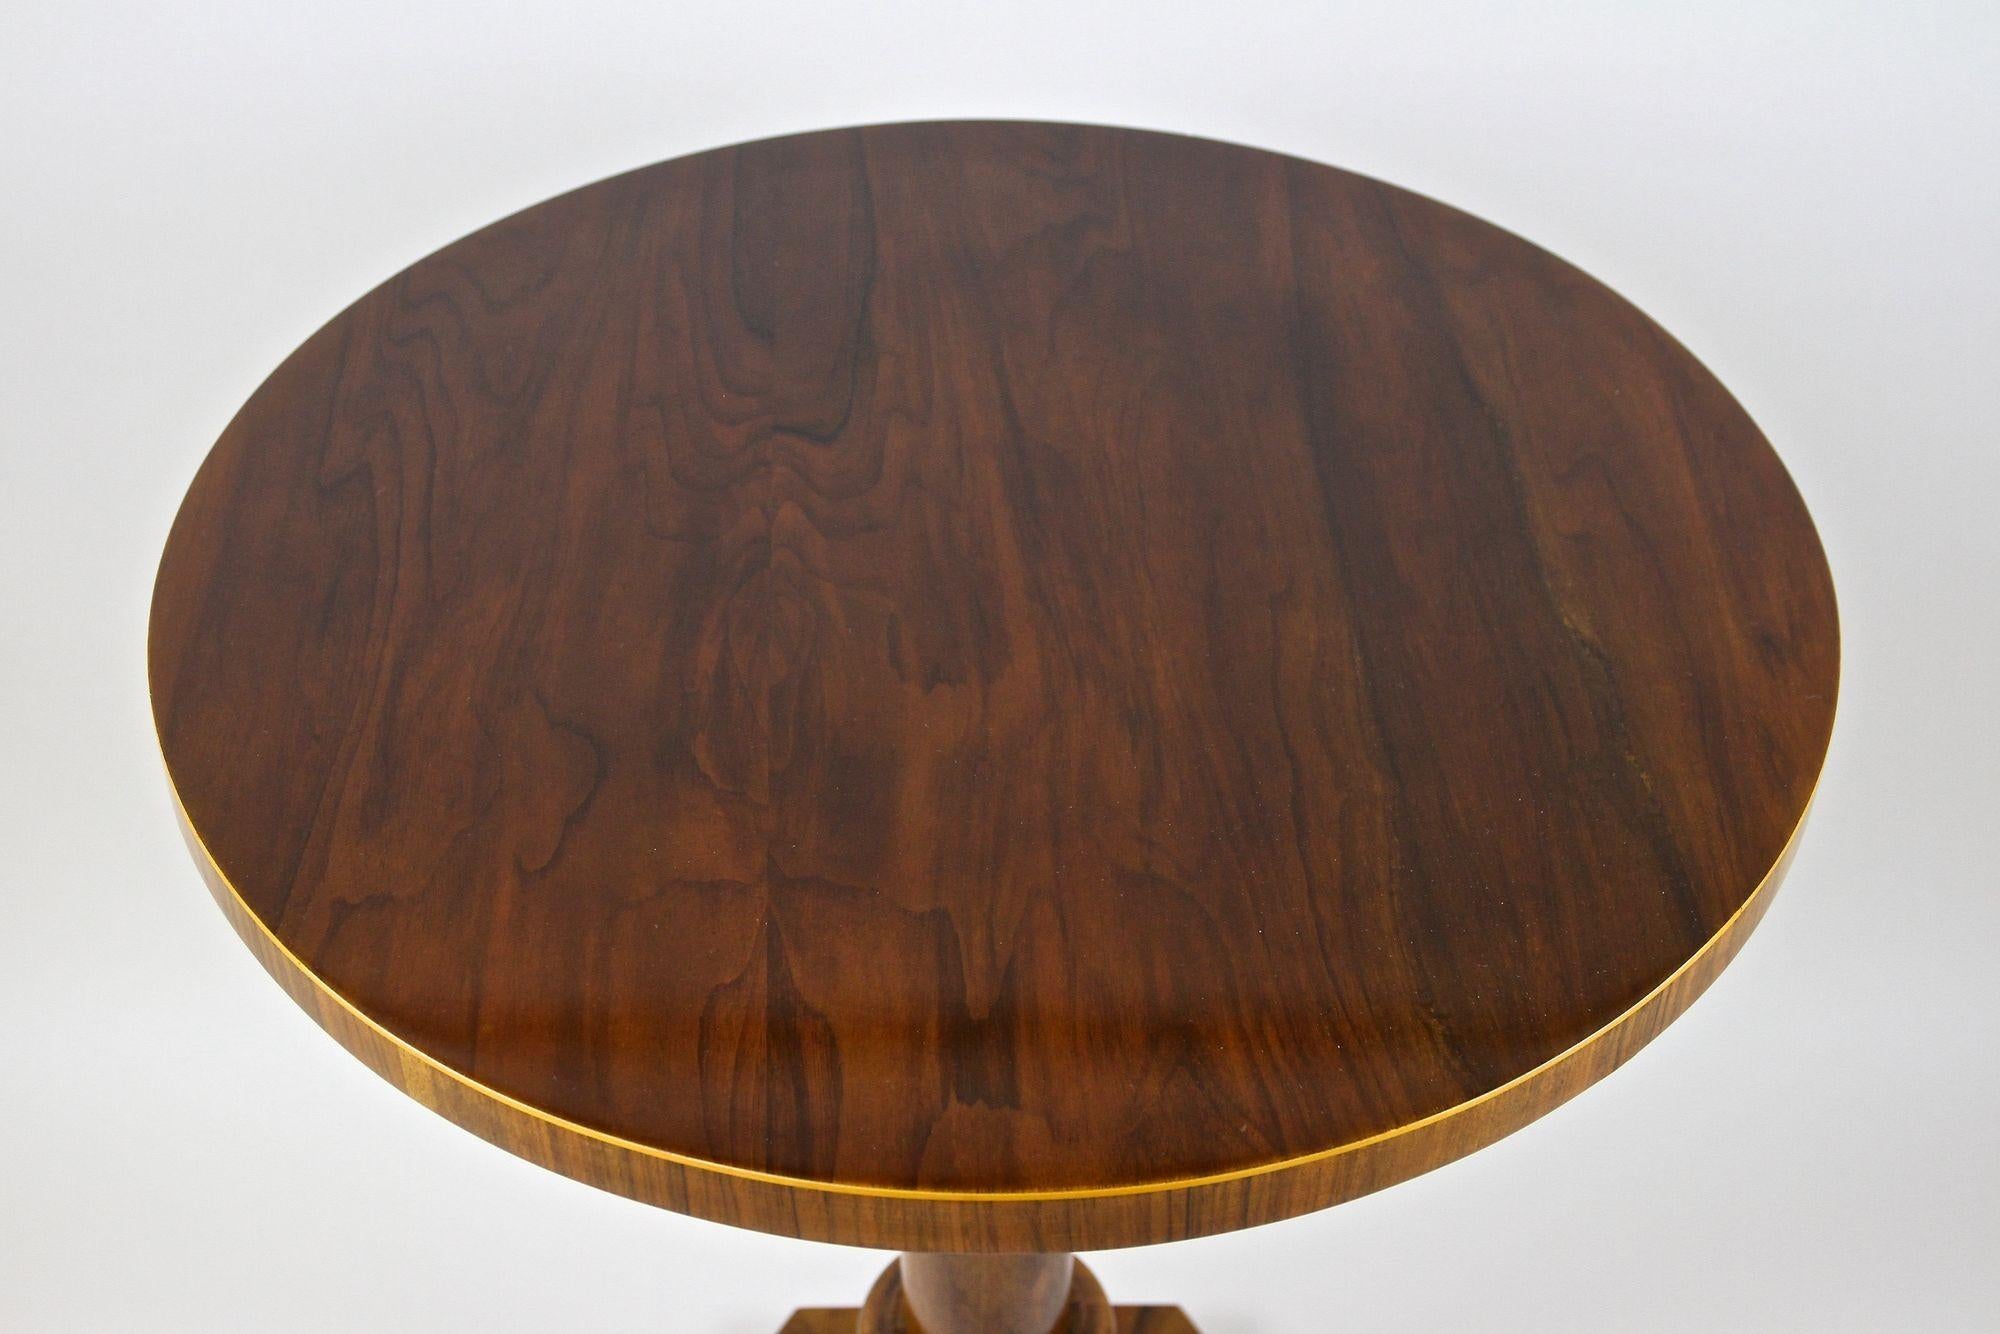 Extraordinary Art Deco nutwood side table from the period in Austria around 1920. This unique round Art Deco table impresses with its elaborately crafted execution. A real fantastic looking side table from the early 20th century with beautifully